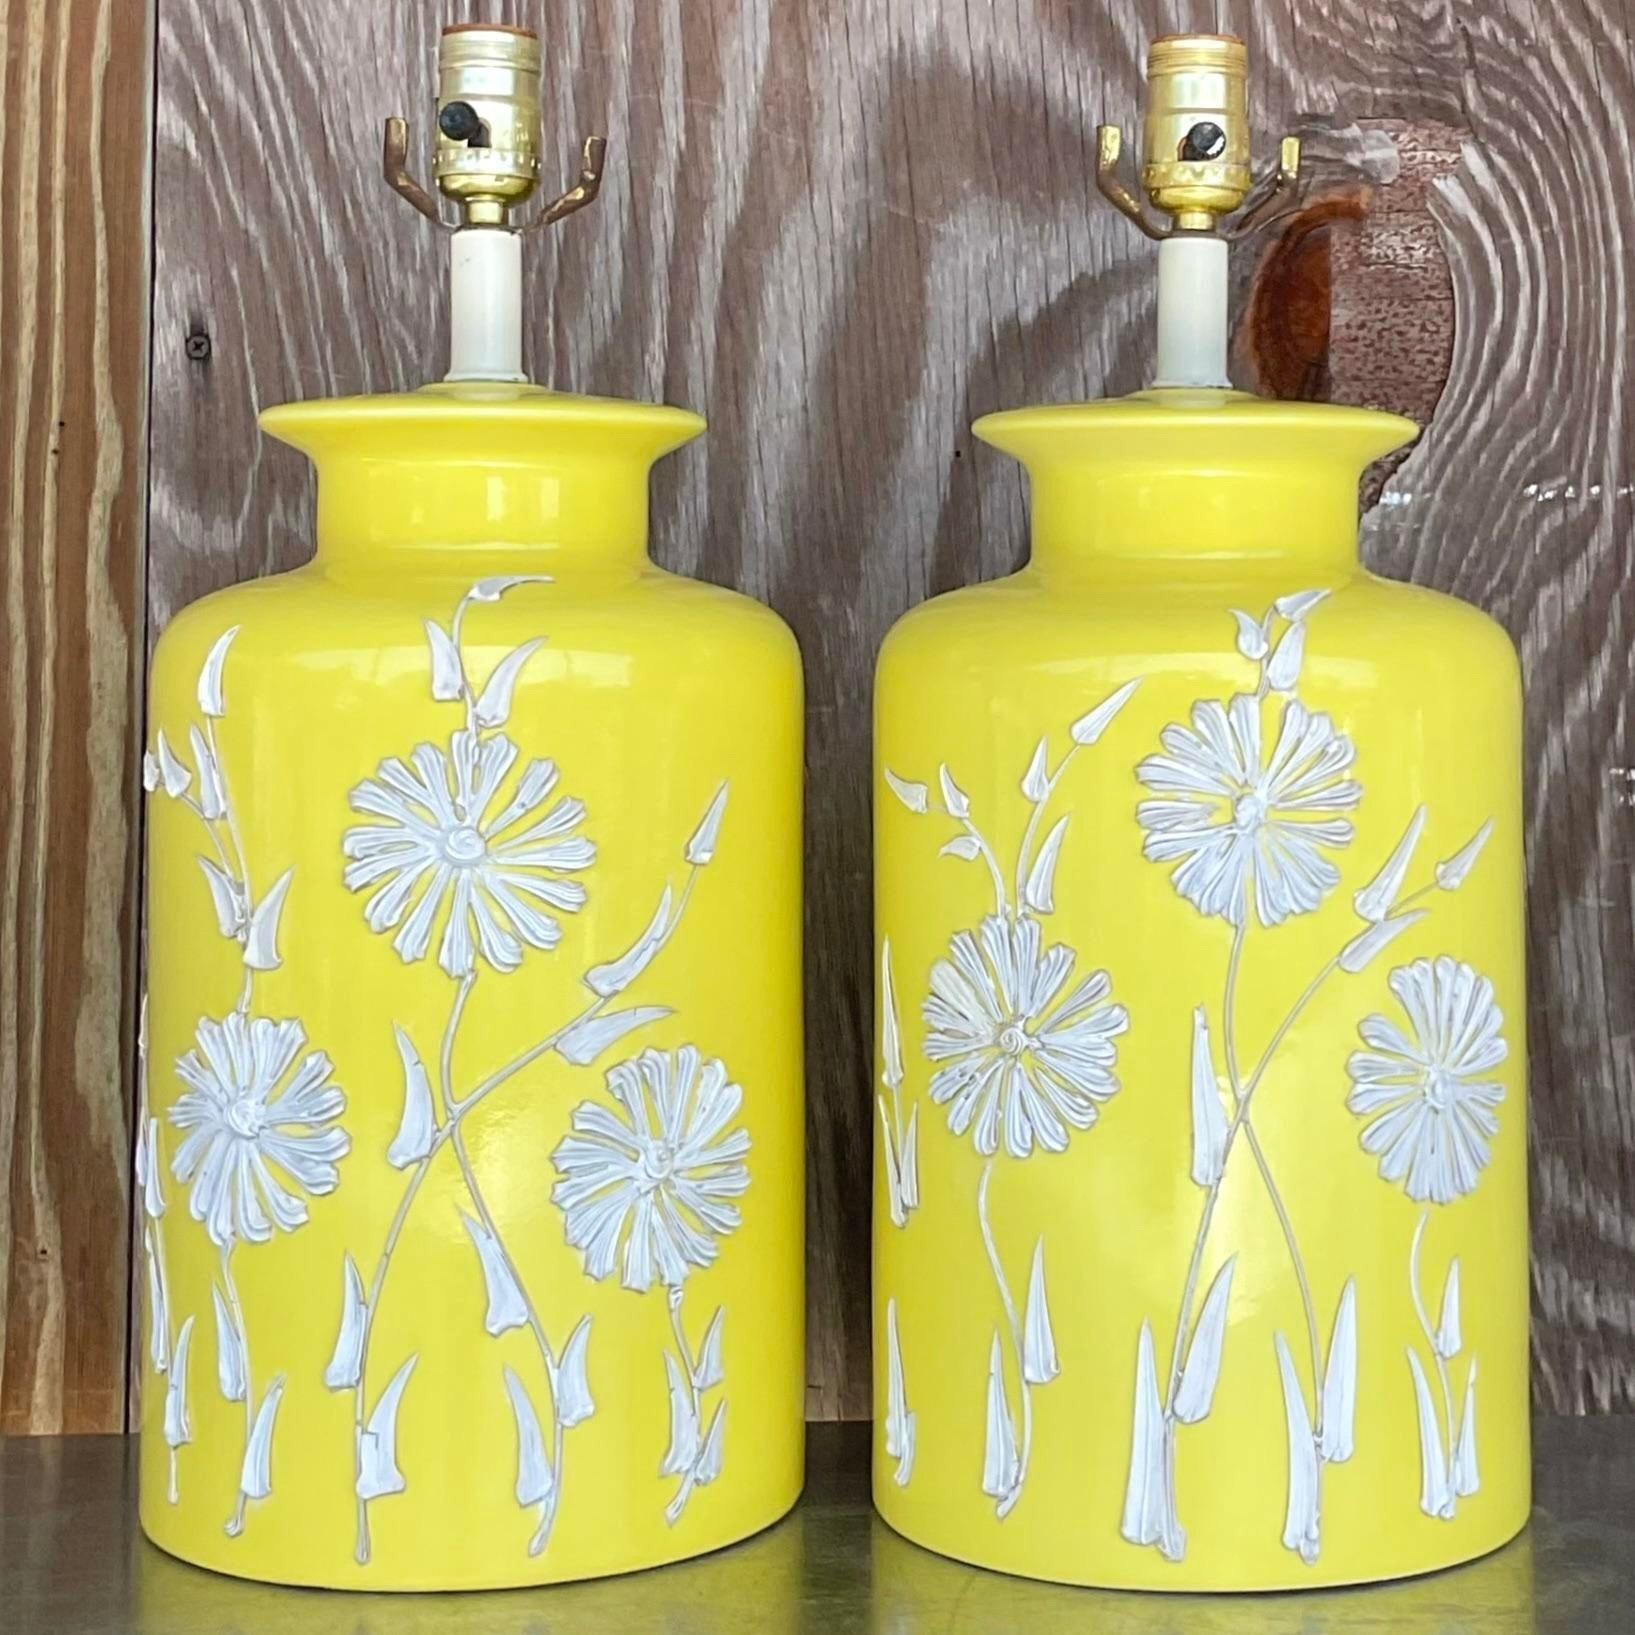 20th Century Vintage Boho Glazed Ceramic Icing Flower Lamps - a Pair For Sale